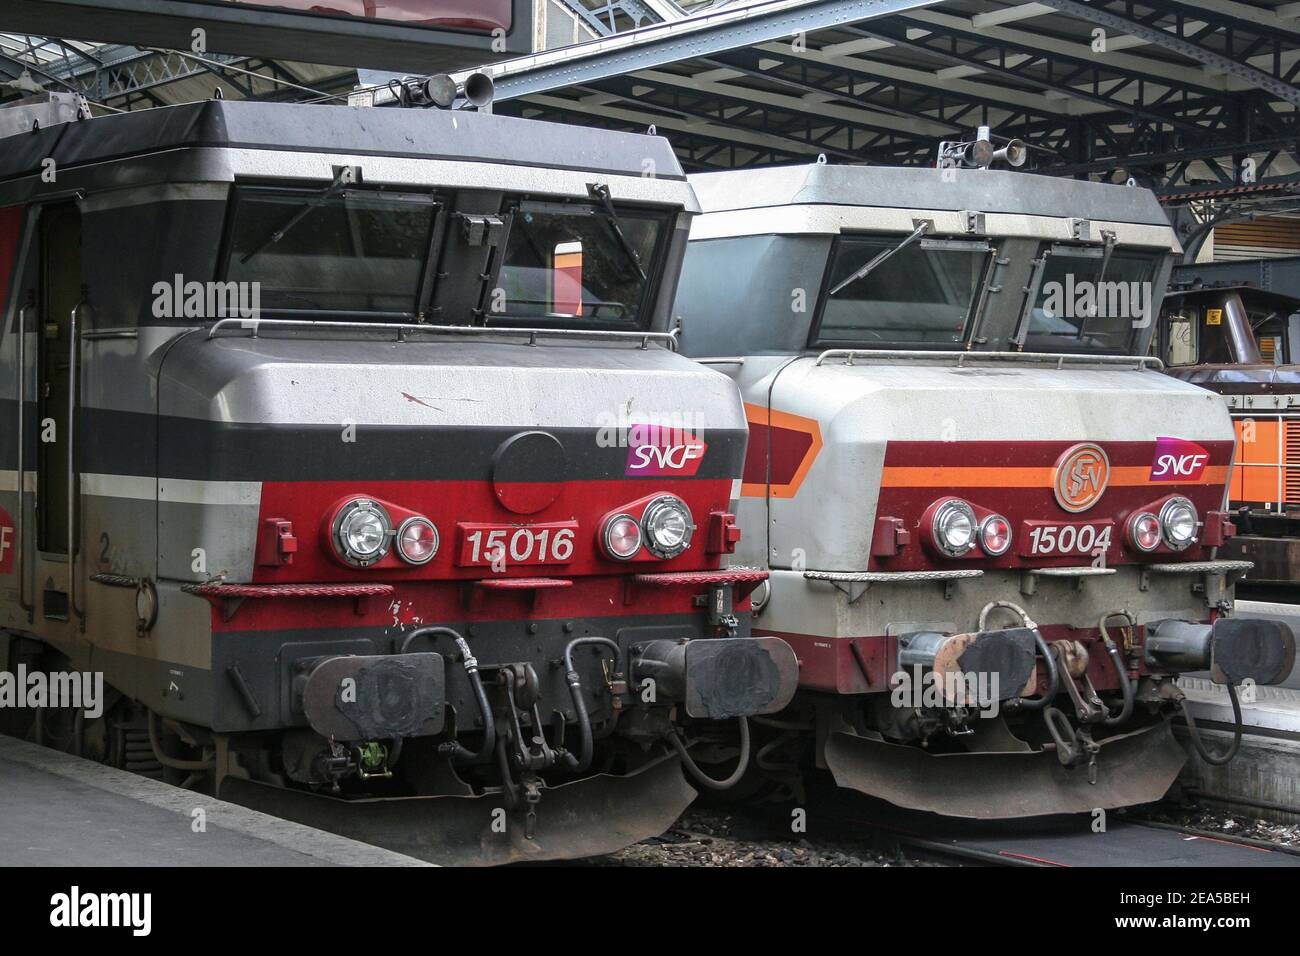 PARIS, FRANCE - AUGUST 19, 2006: Two electric locomotives BB 15000 ready for departure in Paris Gare de l'Est train station, with the logo of SNCF see Stock Photo